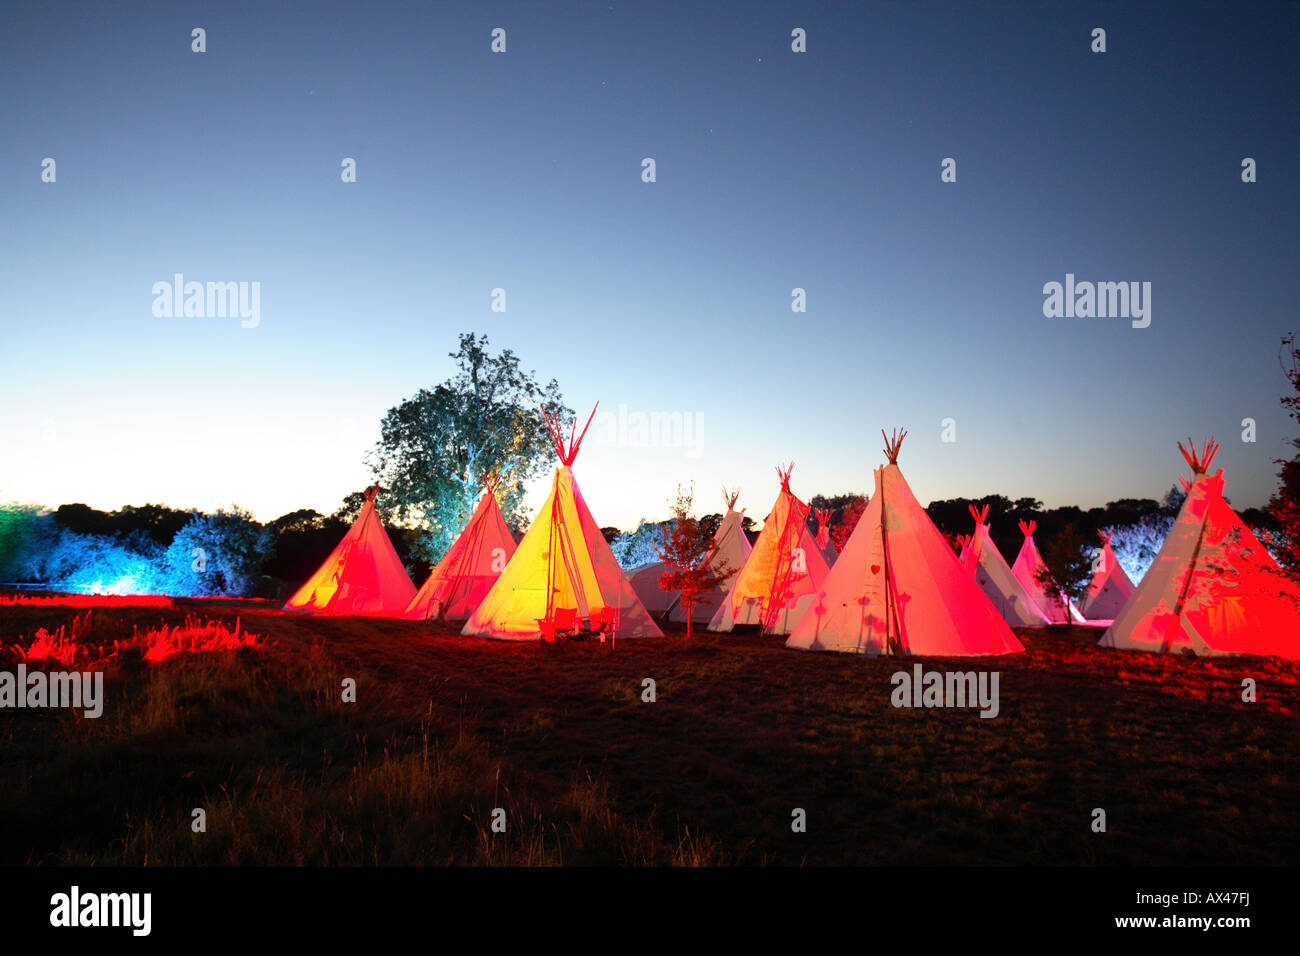 A row of teepees at sunset in an English field Stock Photo